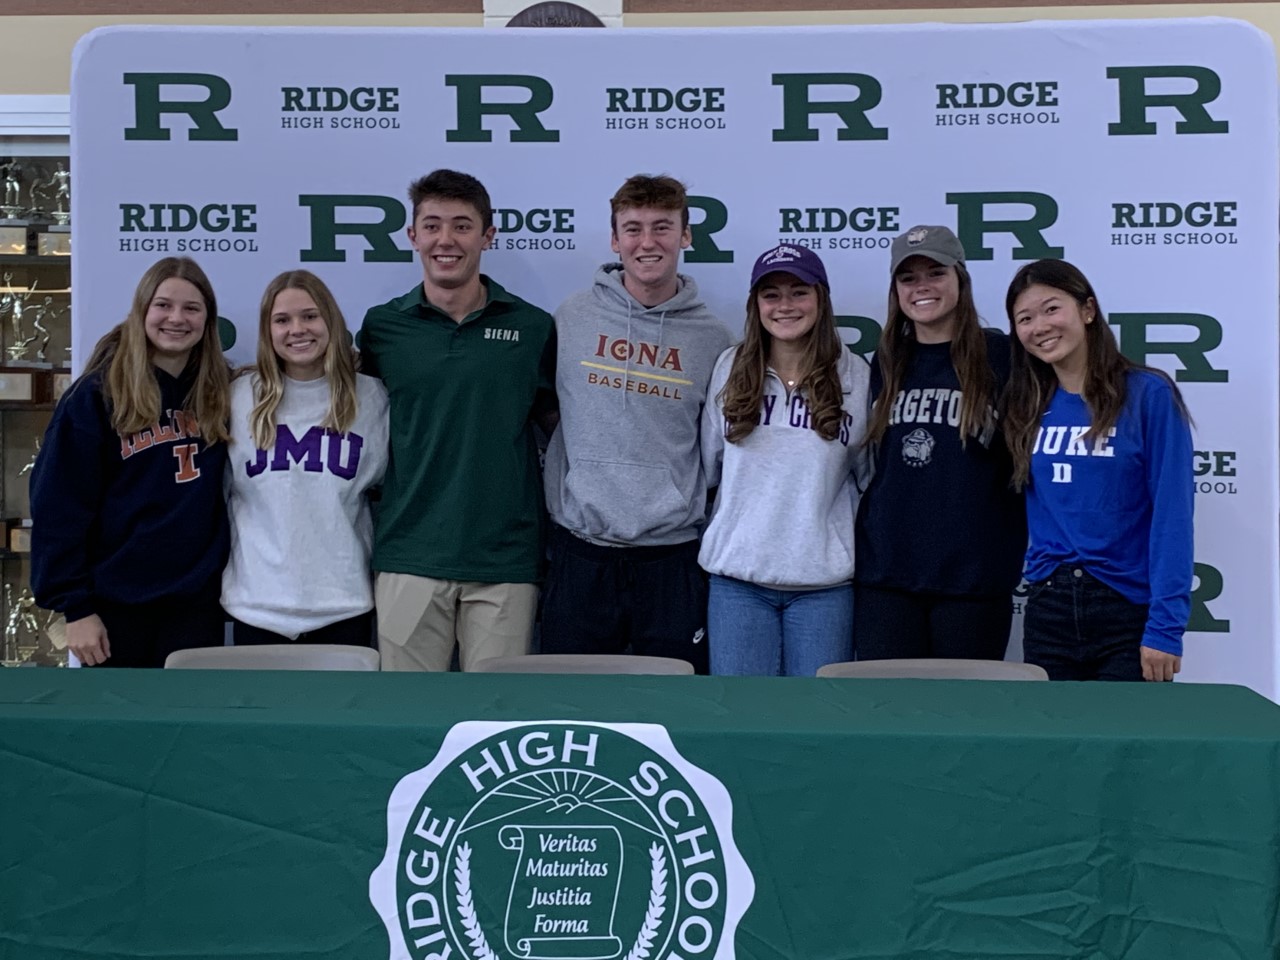 Ridge NLI Signees - Left to Right
Madison Vitolo - Illinois for gymnastics
Katie Vitolo - James Madison for diving
Connor Byrne - Siena for baseball
Brendan Callanan - Iona for baseball
Jennifer Prince - Holy Cross for women's lacrosse
Katie Keefe - Georgetown for women's soccer
Katie Li - Duke for women's golf